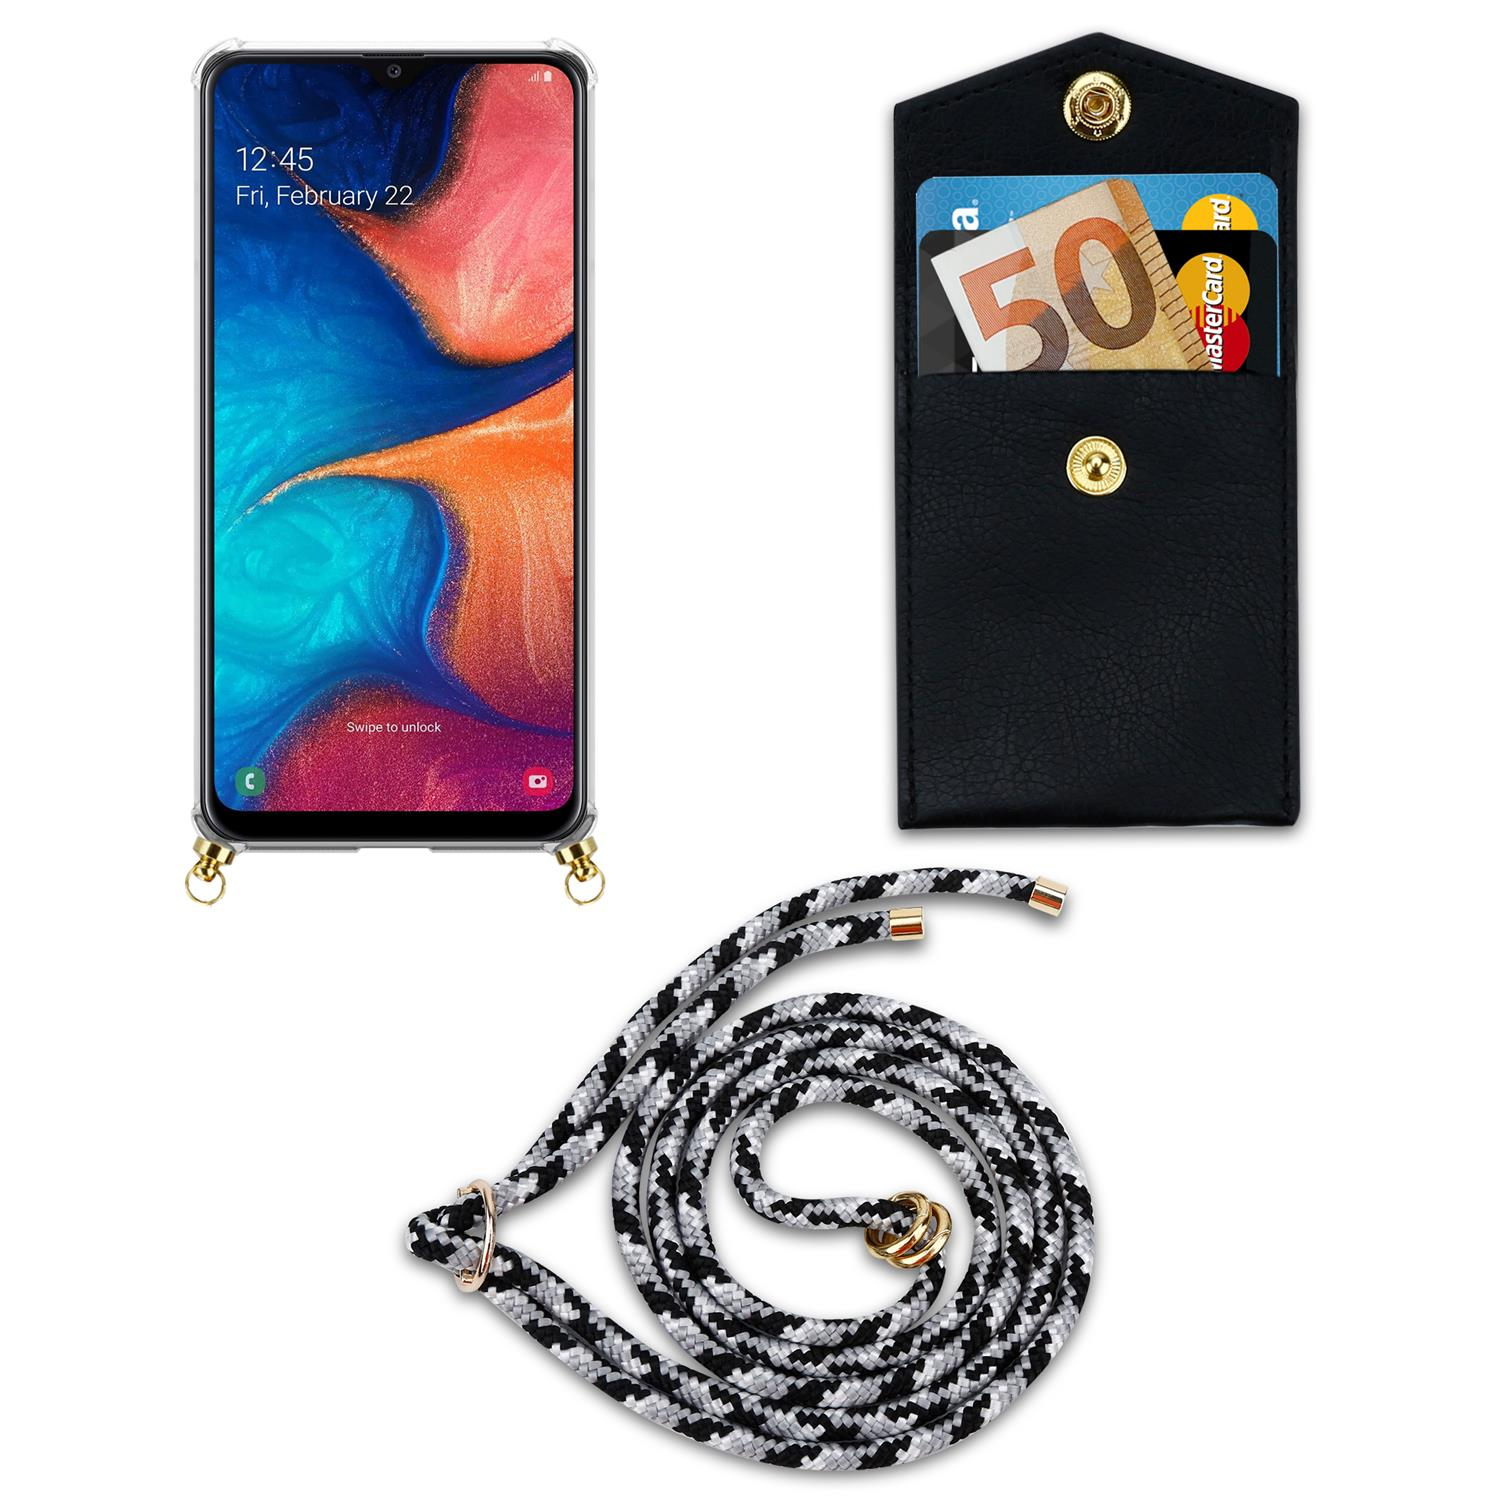 CADORABO Handy Kette Ringen, A20 CAMOUFLAGE abnehmbarer Backcover, Samsung, Gold Hülle, Kordel A30 Galaxy und / M10s, Band / SCHWARZ mit